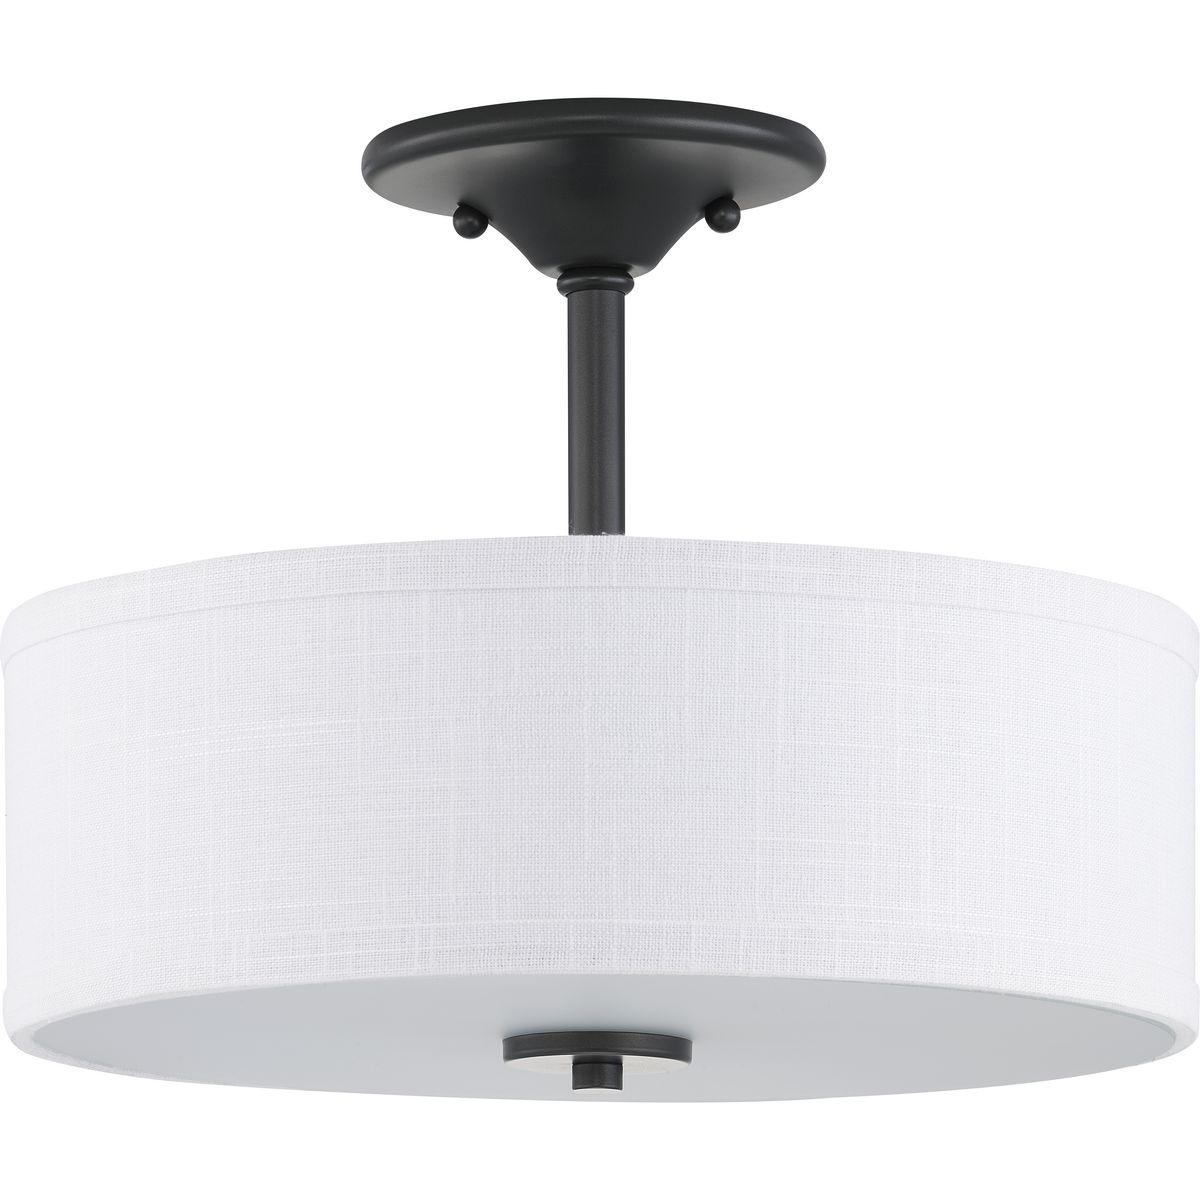 Hubbell P350129-143 Harkening back to a simpler time, the Inspire Collection freshens traditional forms with flowing lines. The two-light semi-flush fixture features an etched glass diffuser with a summer linen shade finished with Graphite details. This fixture is suitable f